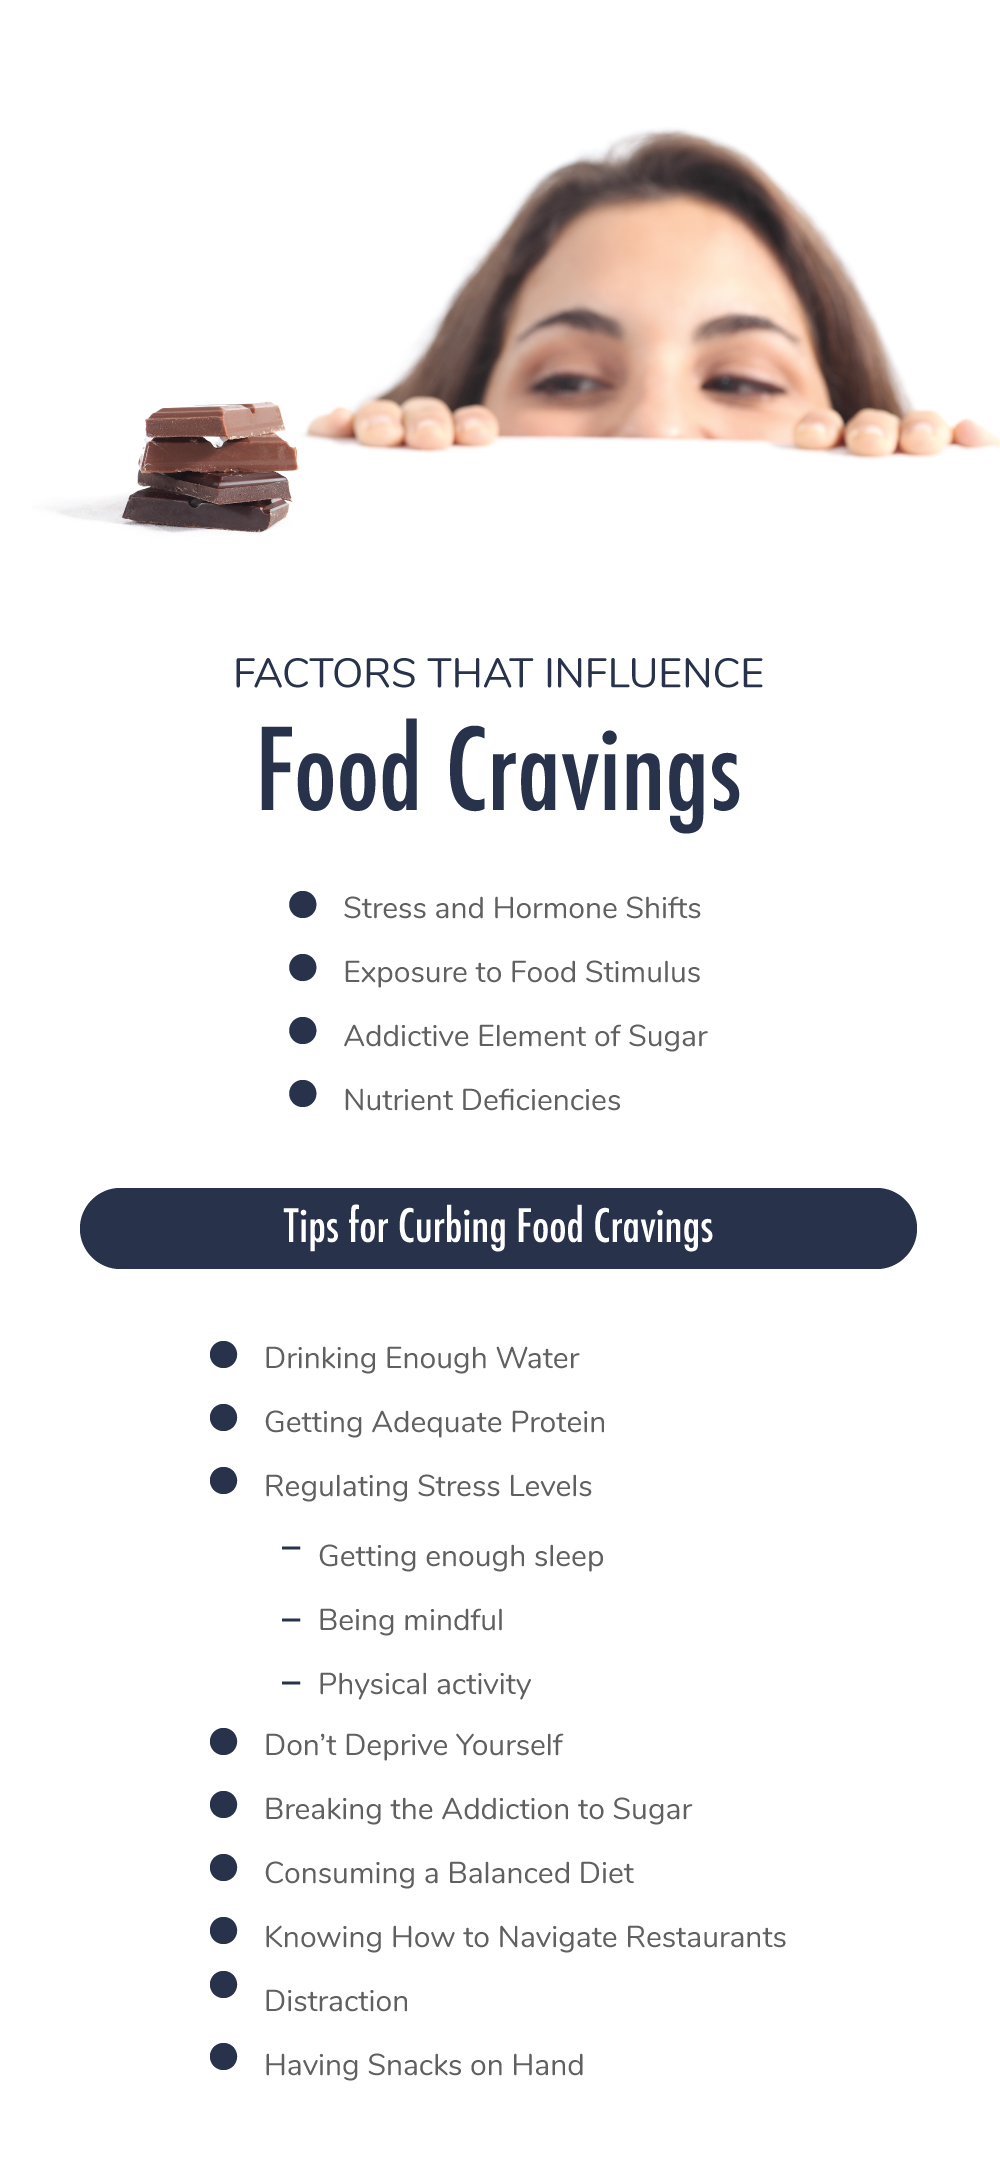 Food Cravings Why Do They Happen?